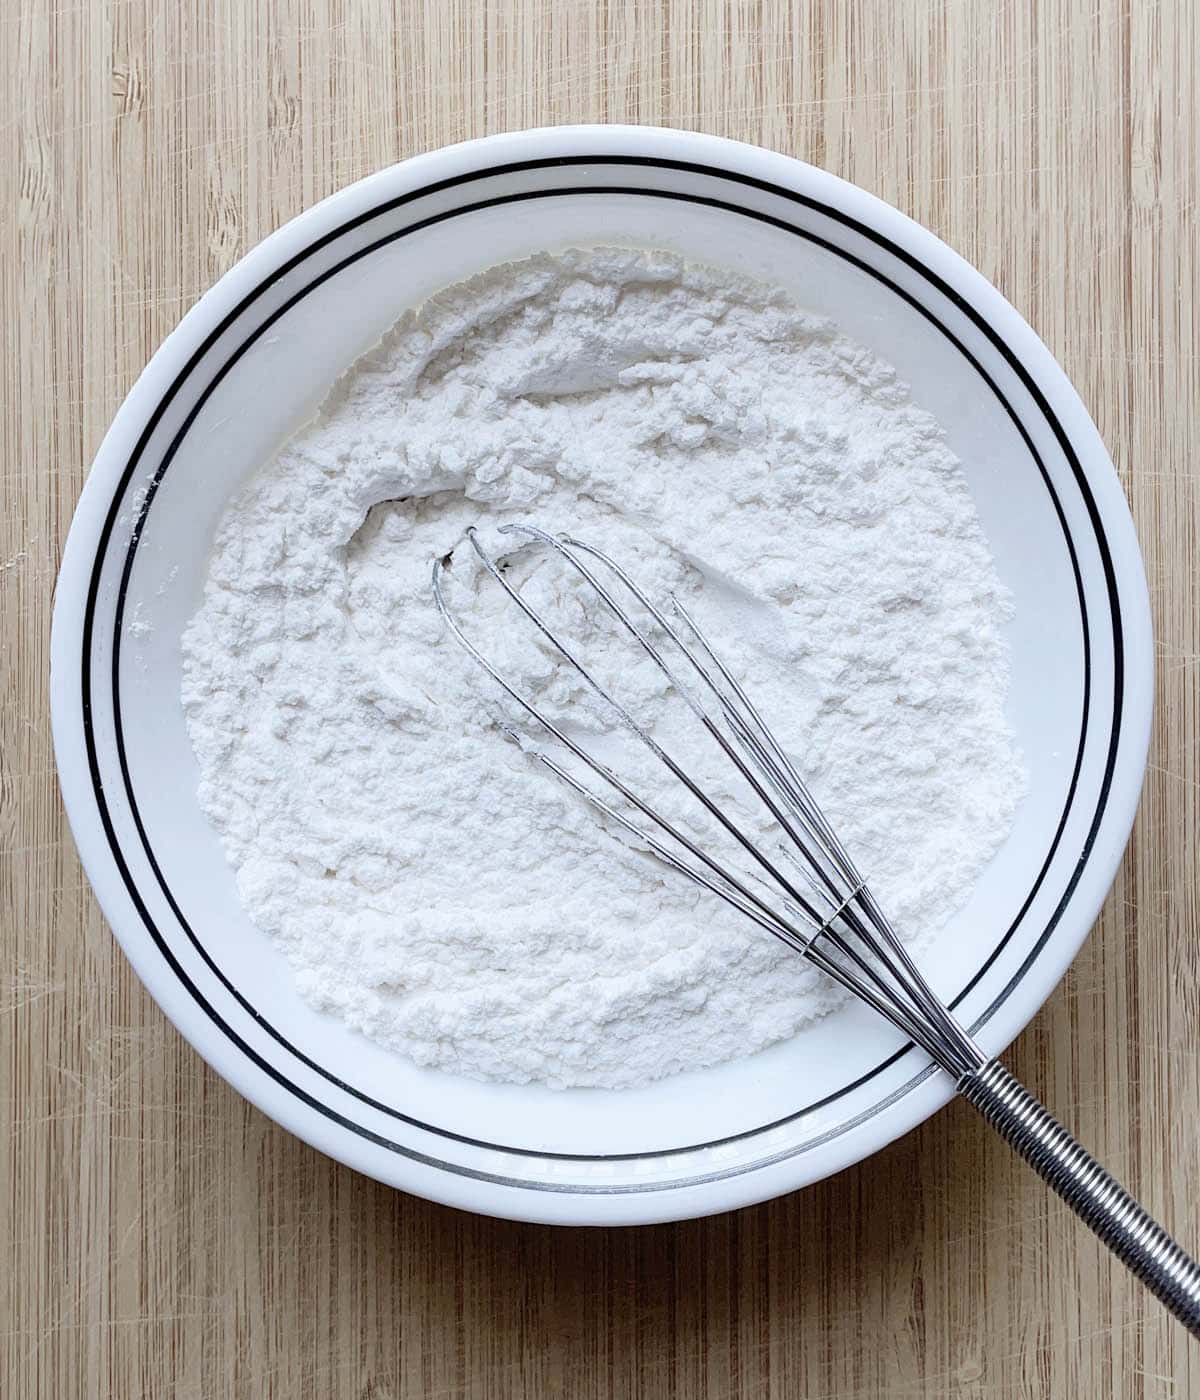 A metal whisk in a round white bowl containing white flour.